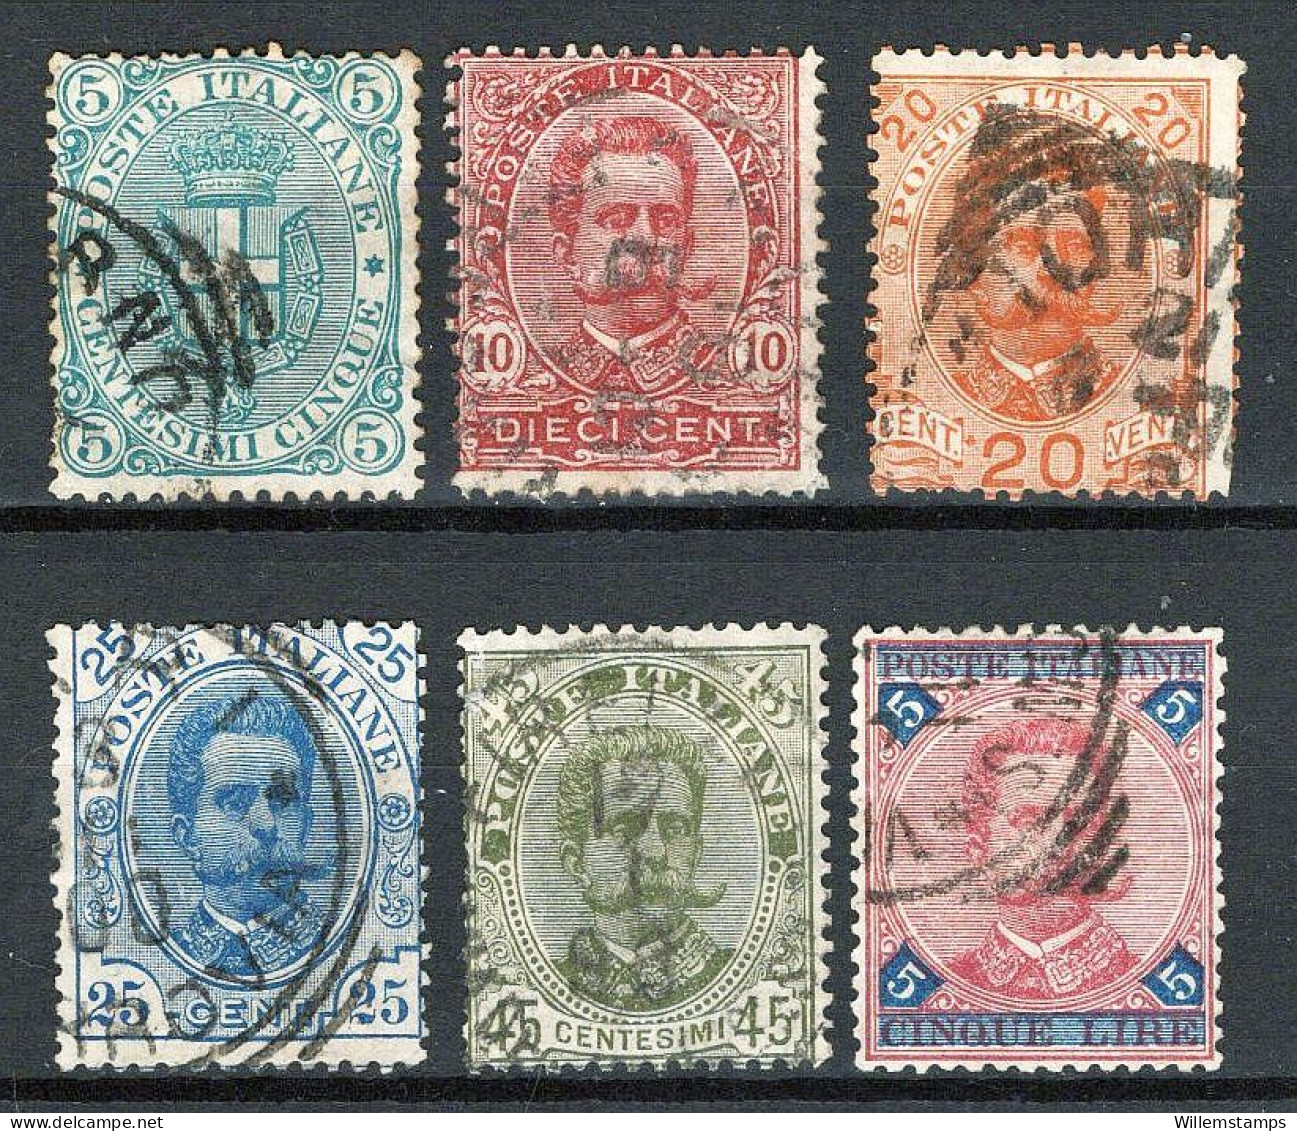 Italy 1891-1896 Michel Nrs 59, 60, 67-70 & Sassone Nrs 59-64 (it-4-2) - Used